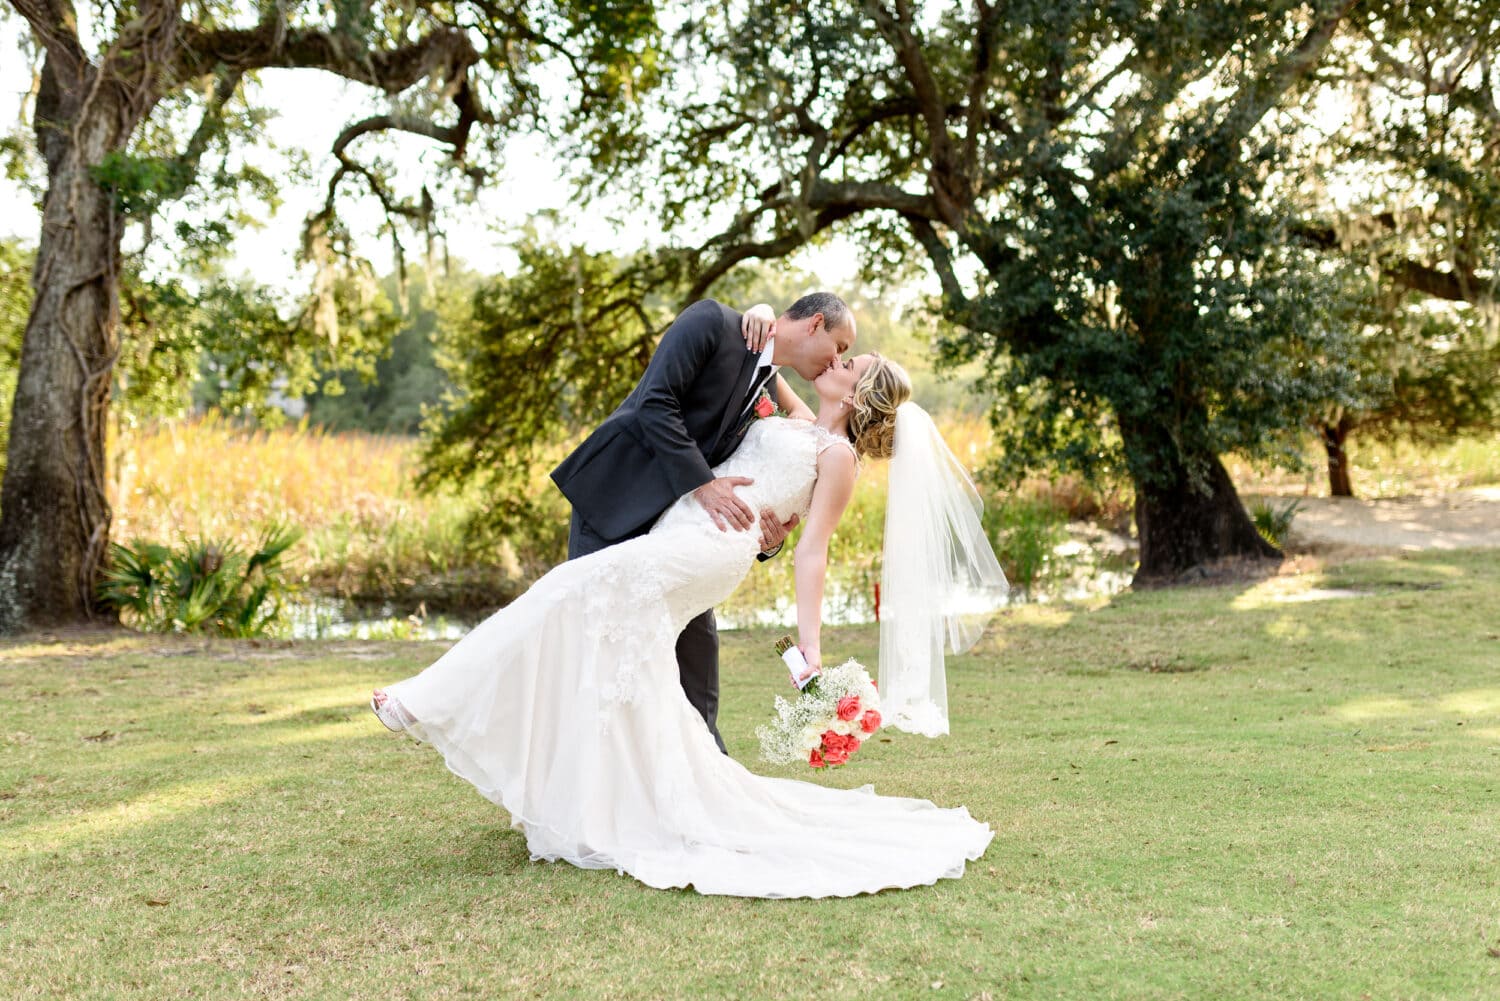 Kiss under the Oak Trees on the golf course 35mm f/2 - Pawleys Plantation Golf & Country Club